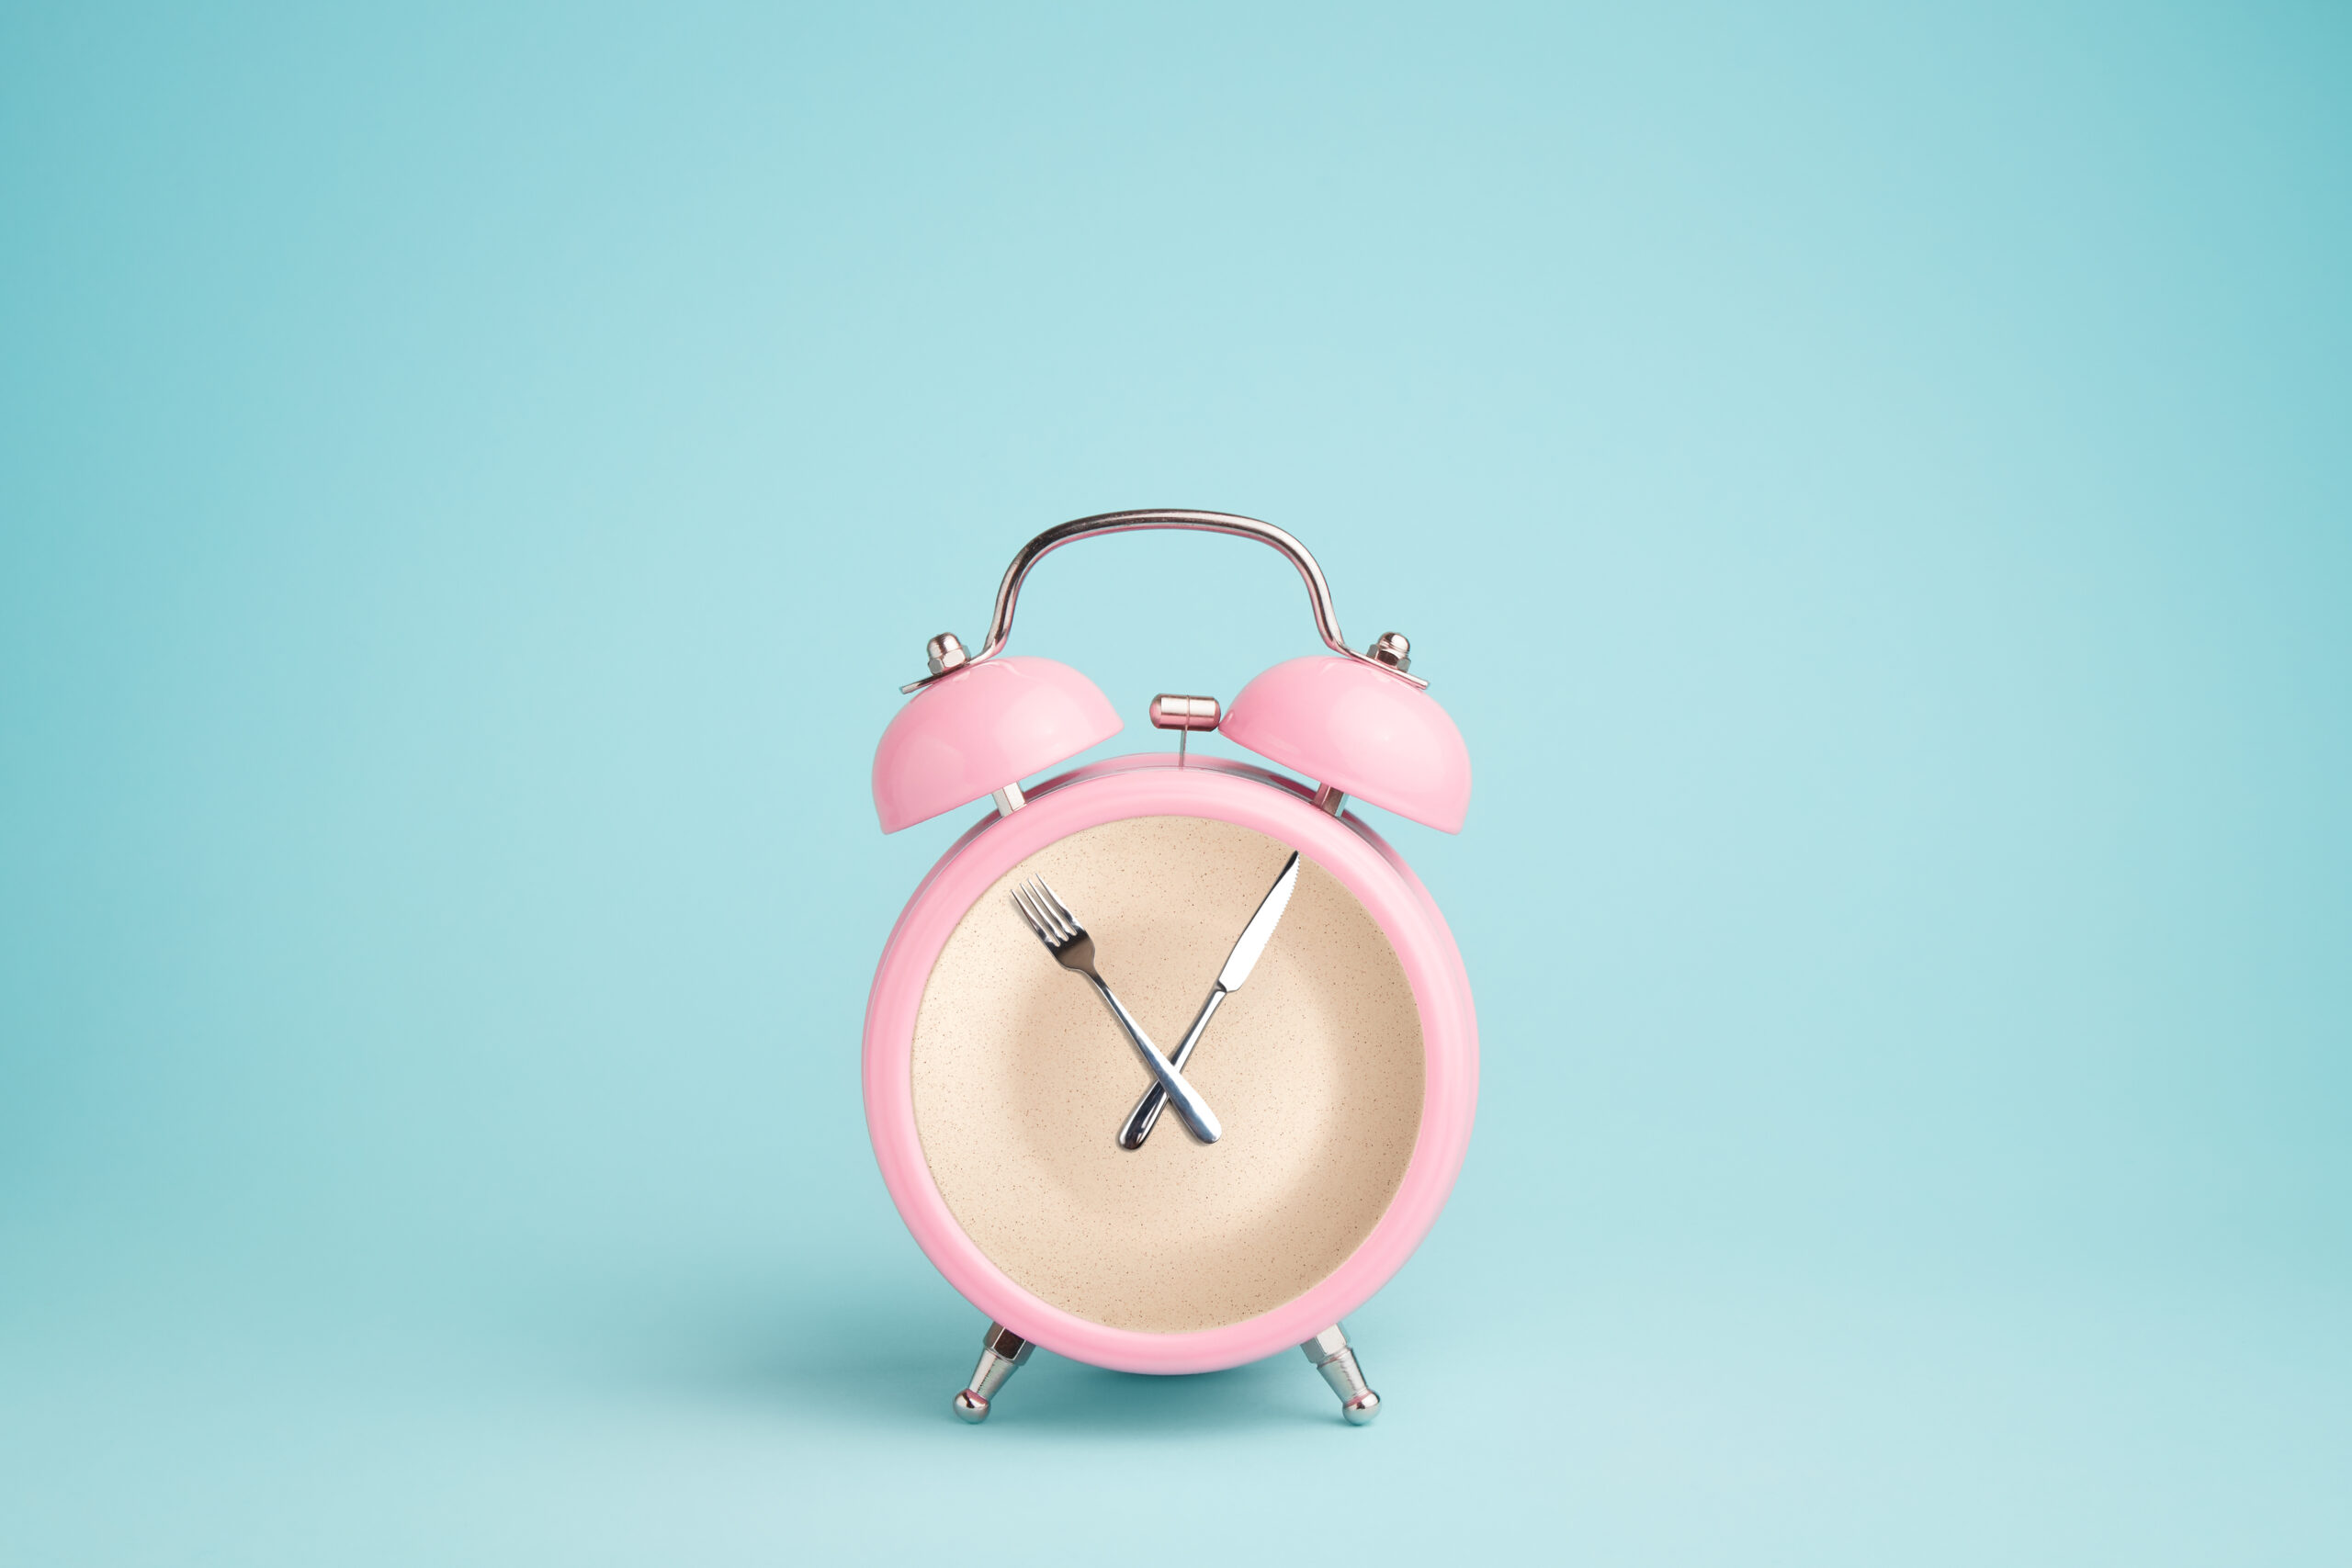 A pink alarm clock photographed against a light teal background. The clock hands are a fork and knife.